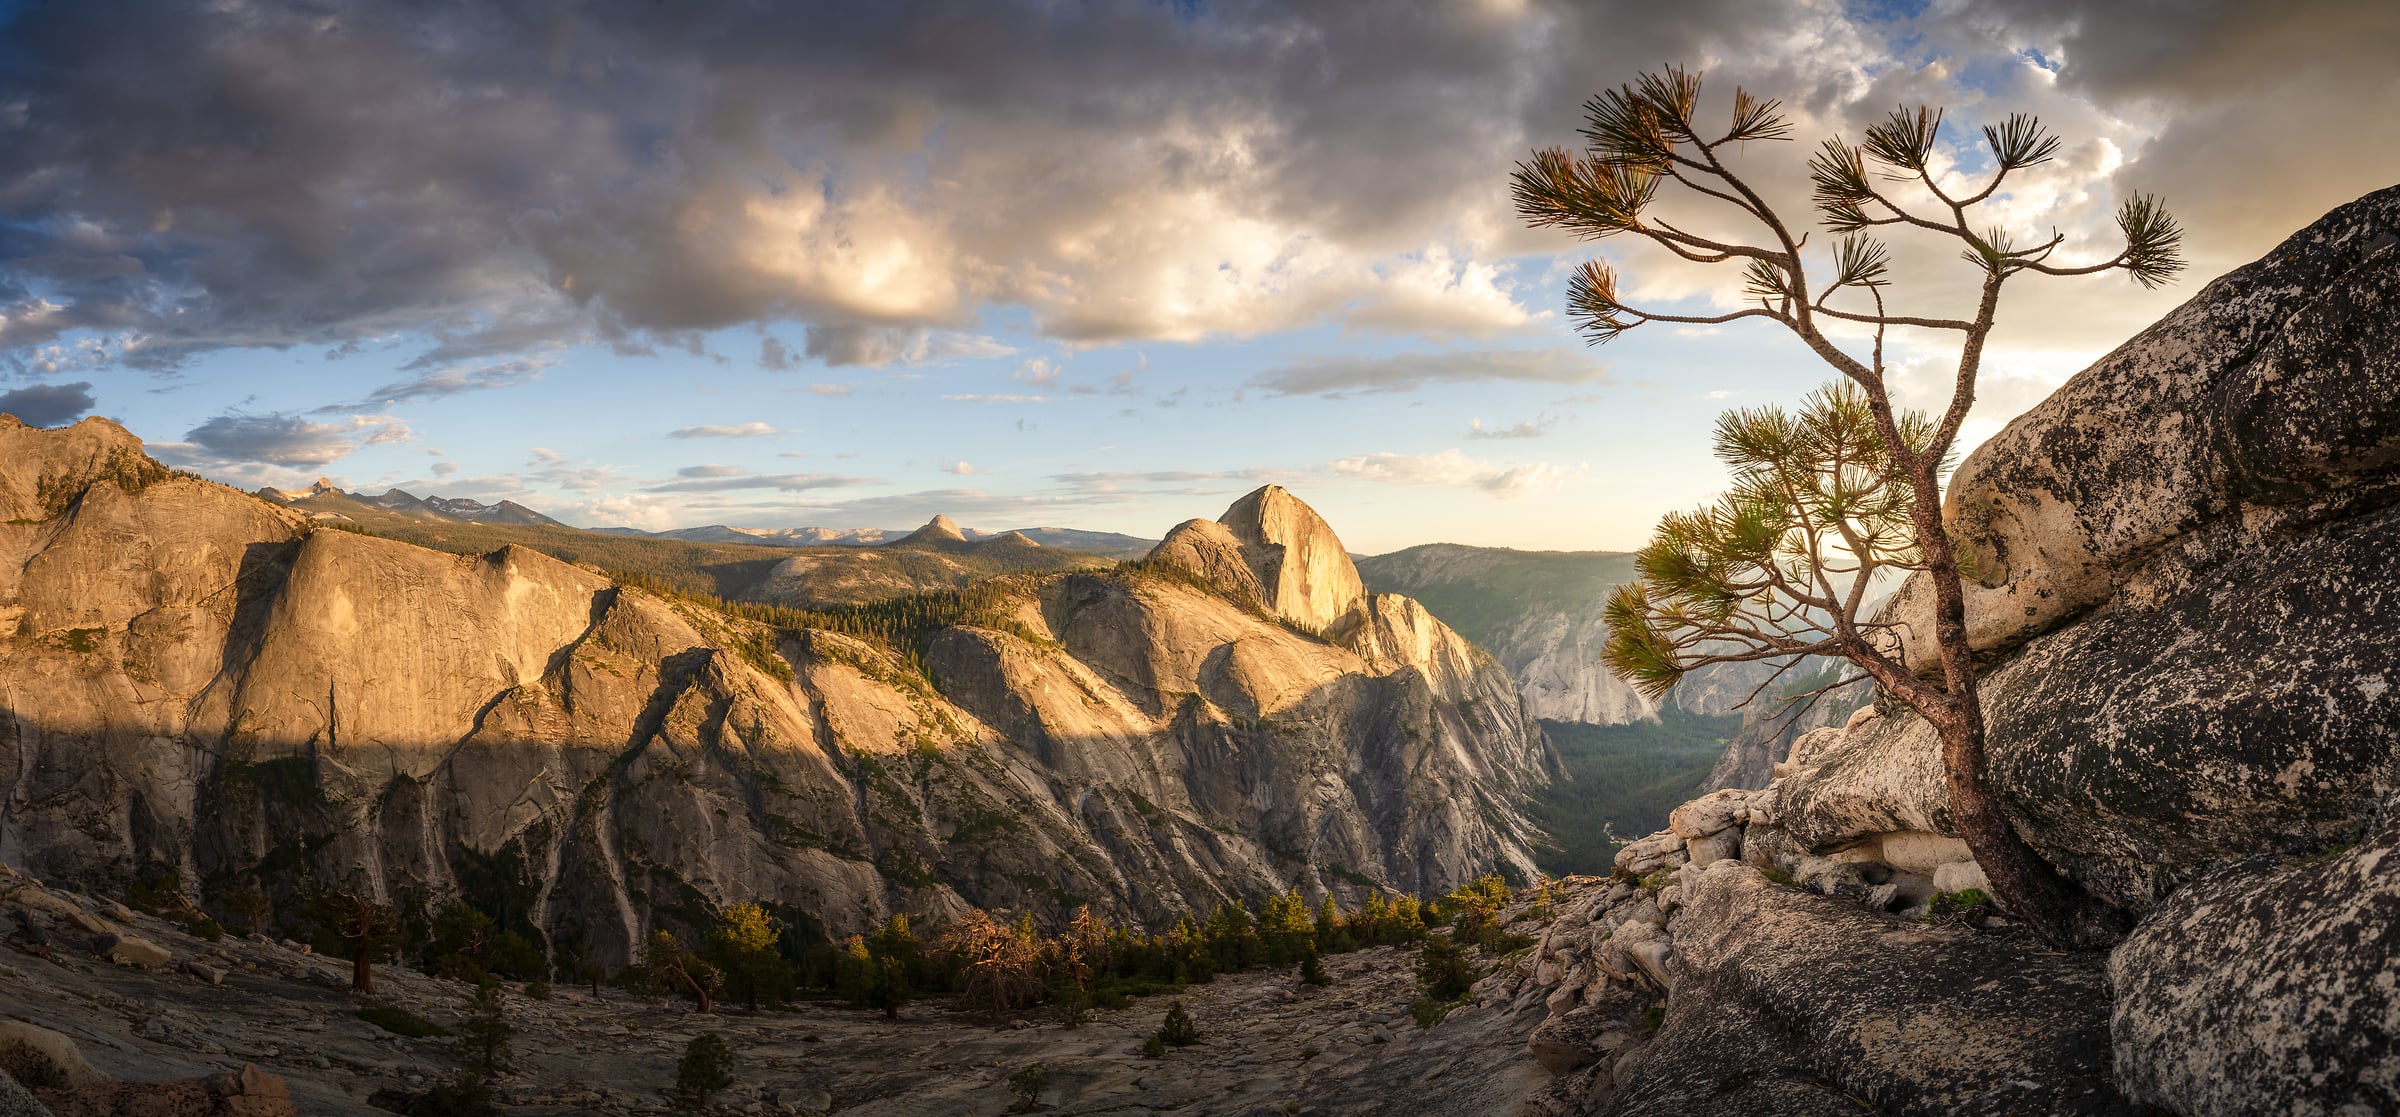 147 megapixels! A very high resolution, large-format VAST photo print of a small tree growing out of the rocks with the mountains and valleys of Yosemite National Park in the background; landscape nature photograph created by Jeff Lewis in Yosemite National Park, California.